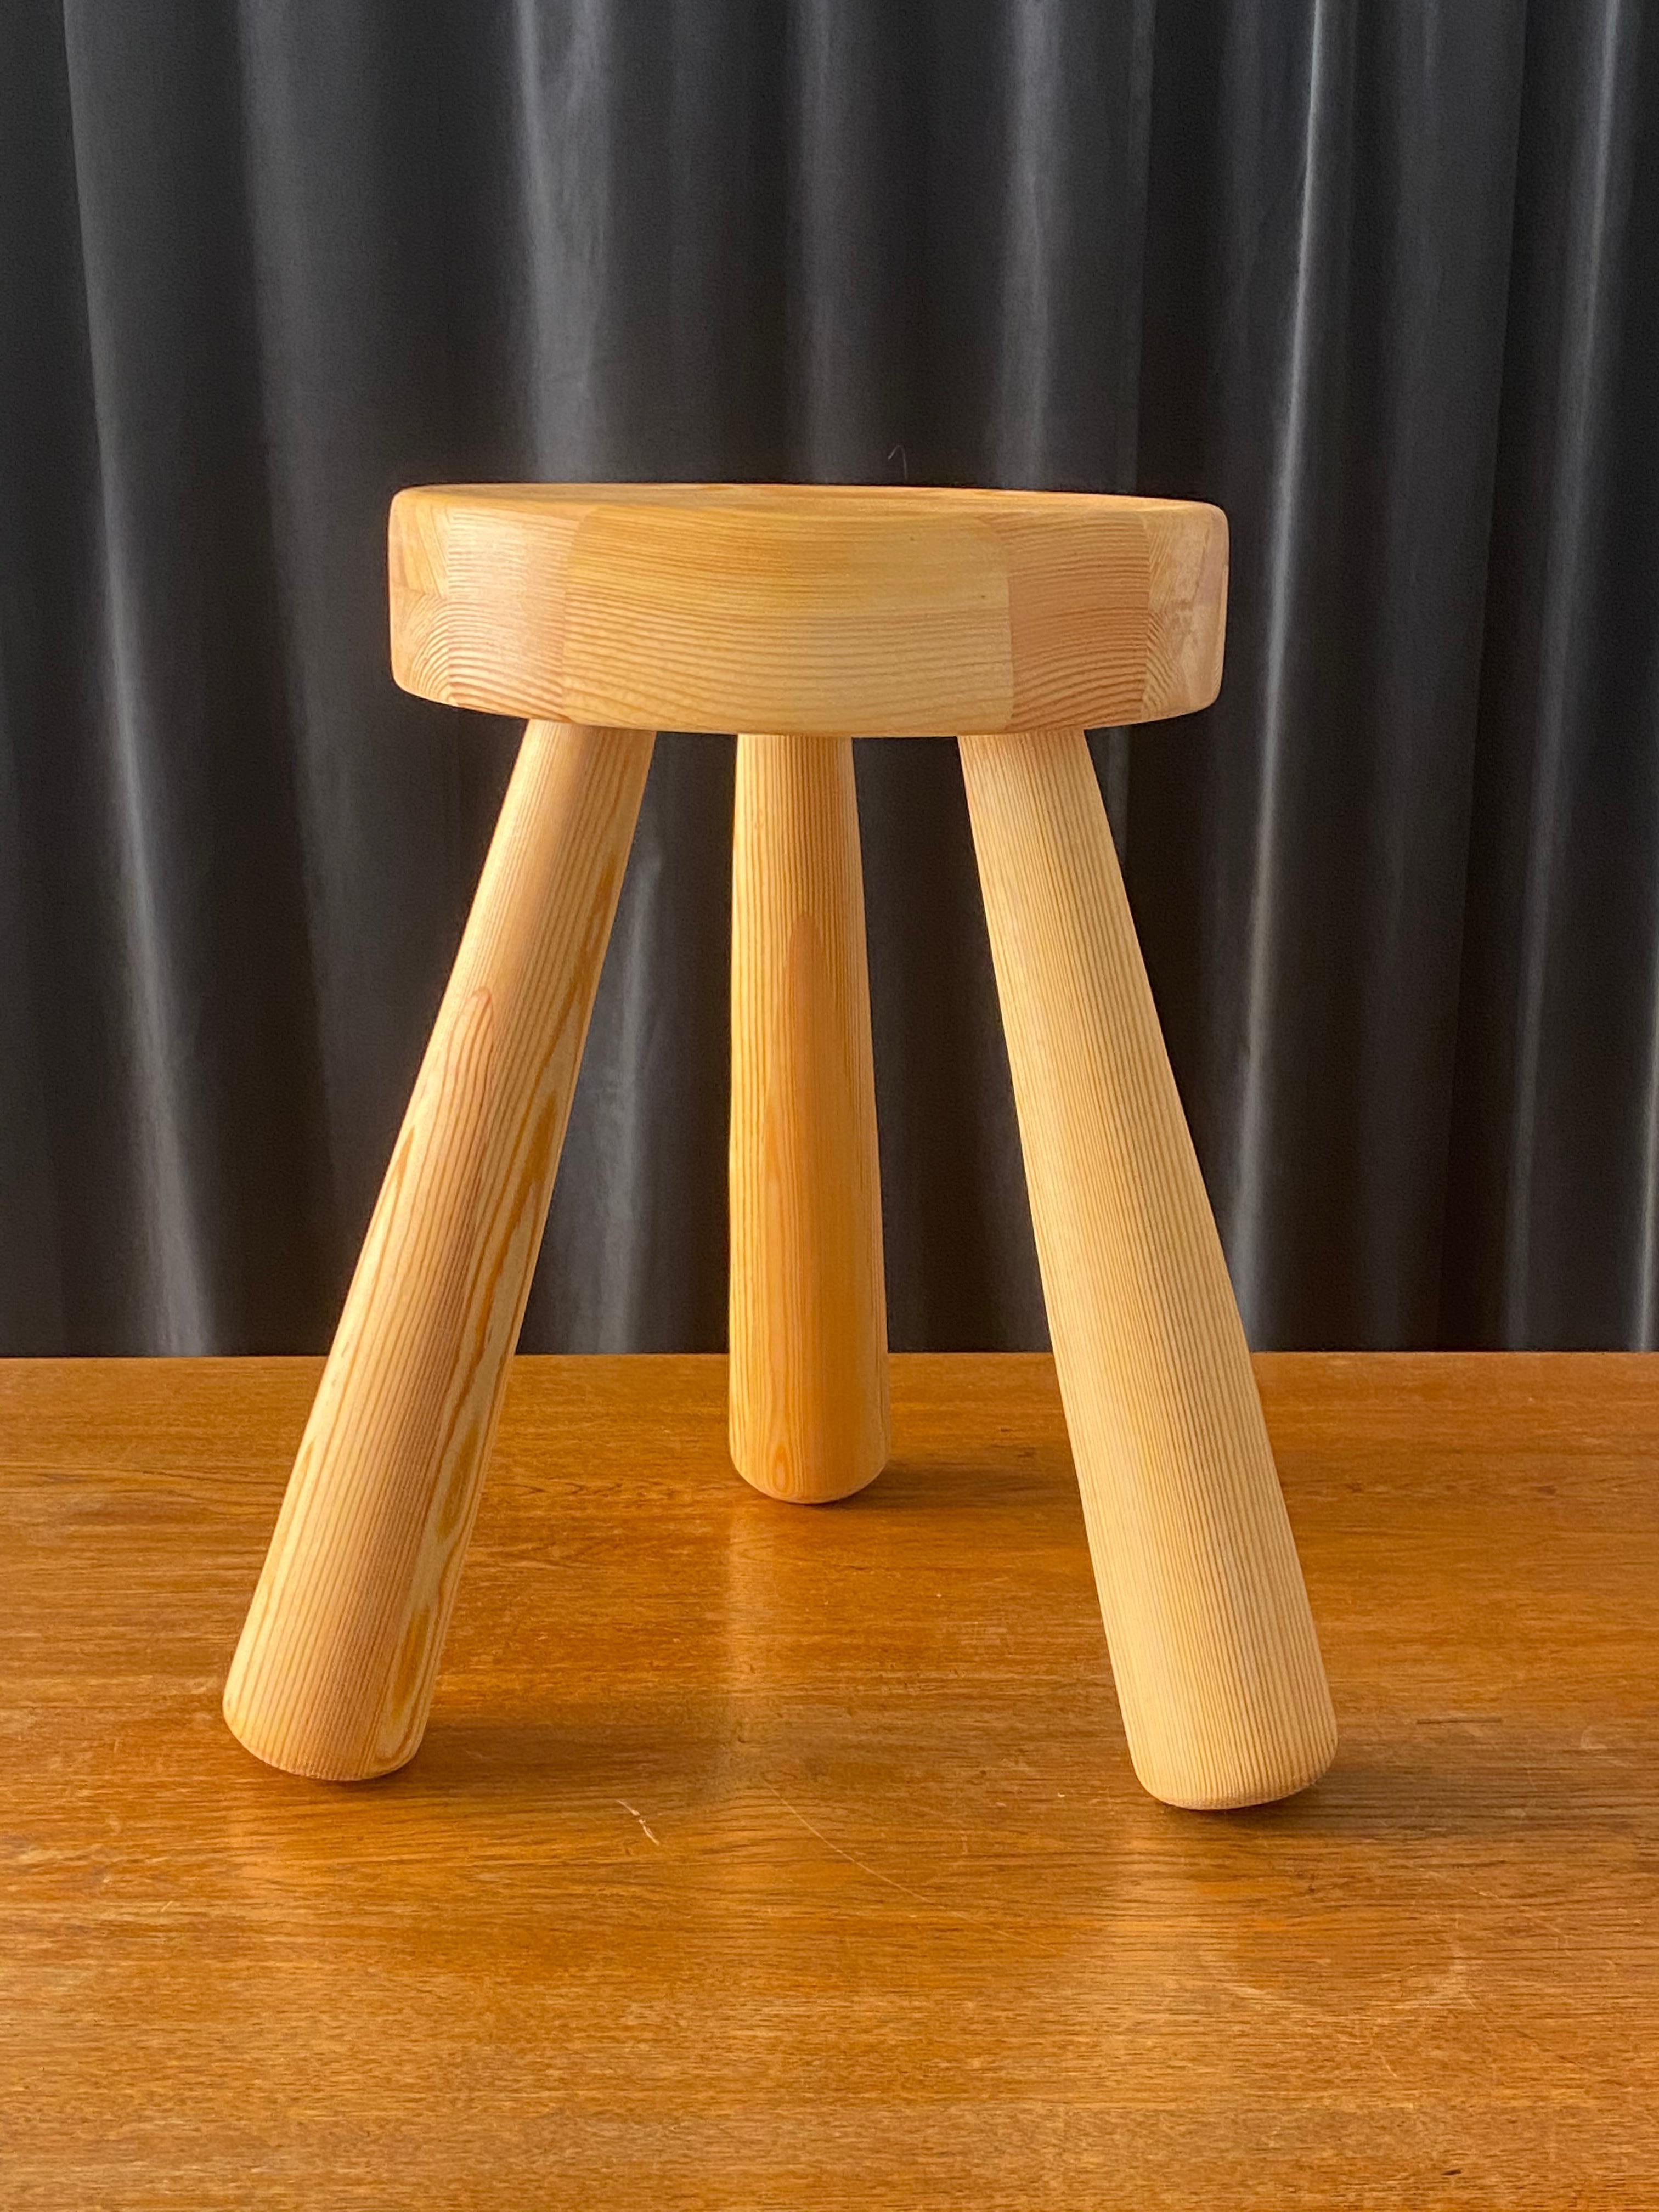 A large and sculptural stool, designed and produced in the studio of Ingvar Hildingsson, Kalmar Läns Slöjdare IH Slöjd Rugstorp. Signed and labeled. In lightly treated pine. Lightly restored and in excellent condition.